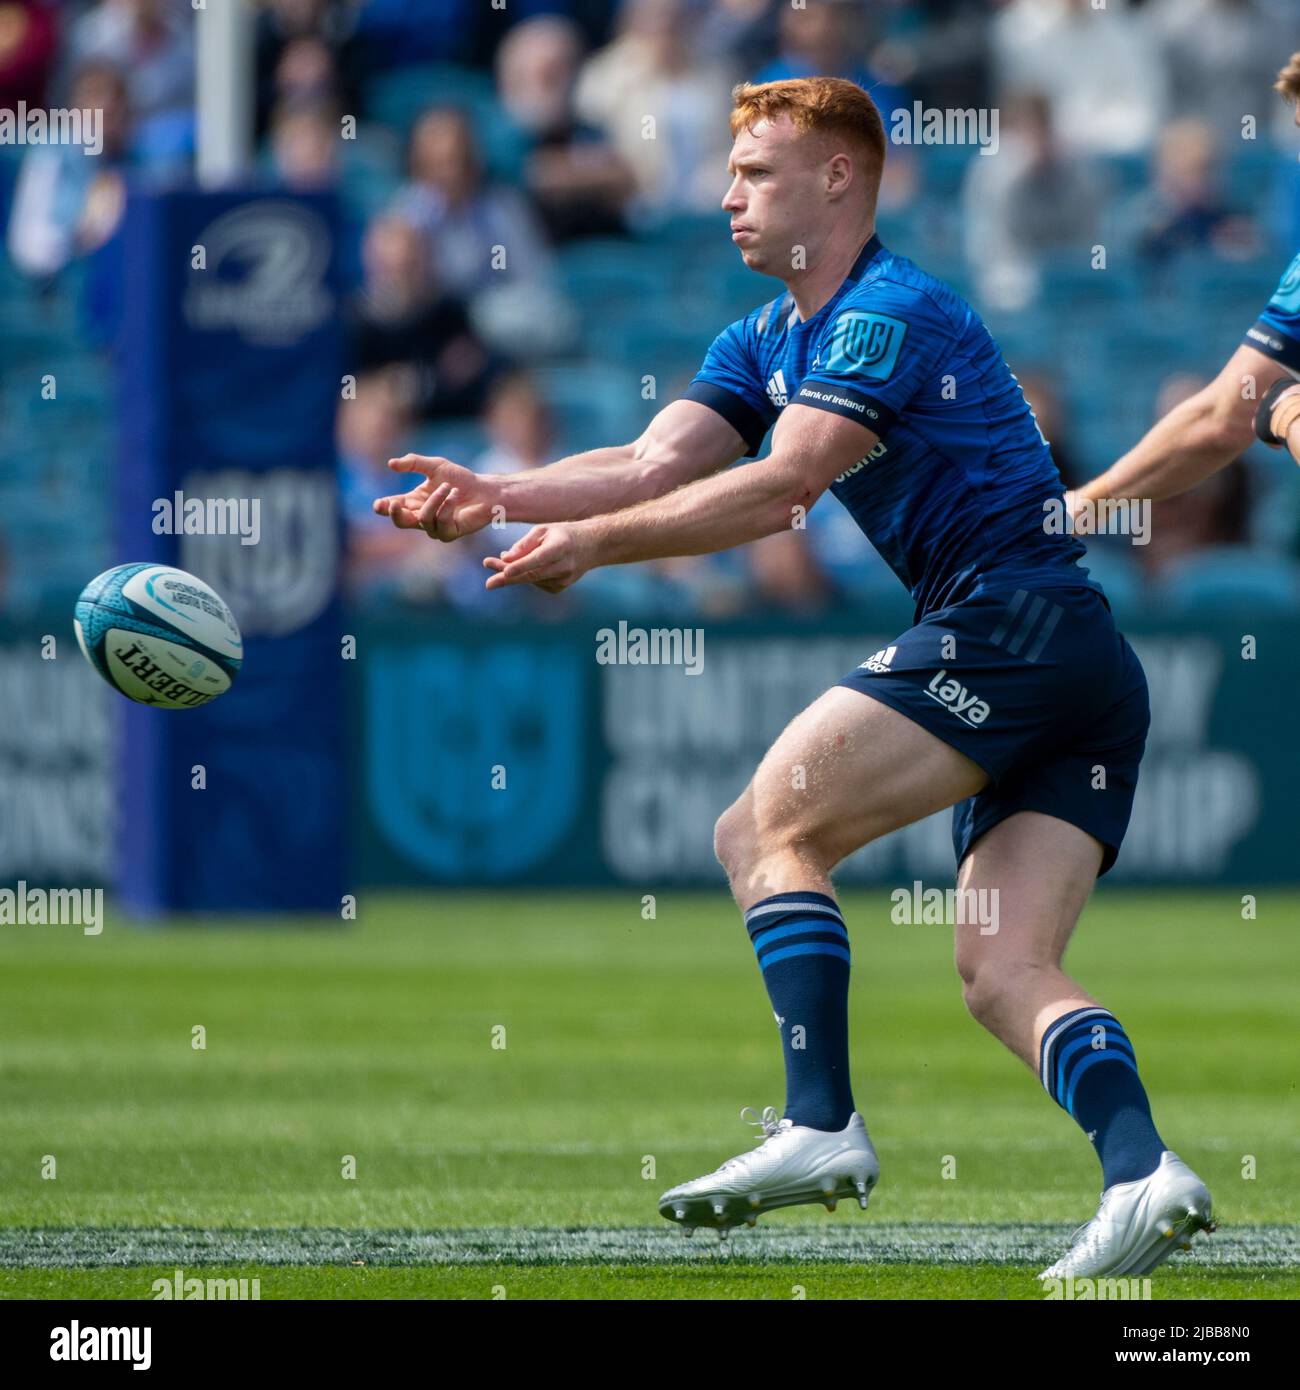 Ciaran Frawley of Leinster in action during the United Rugby Championship Quarter-final match between Leinster Rugby and Glasgow Warriors at RDS Arena in Dublin, Ireland on June 4, 2022 (Photo by Andrew